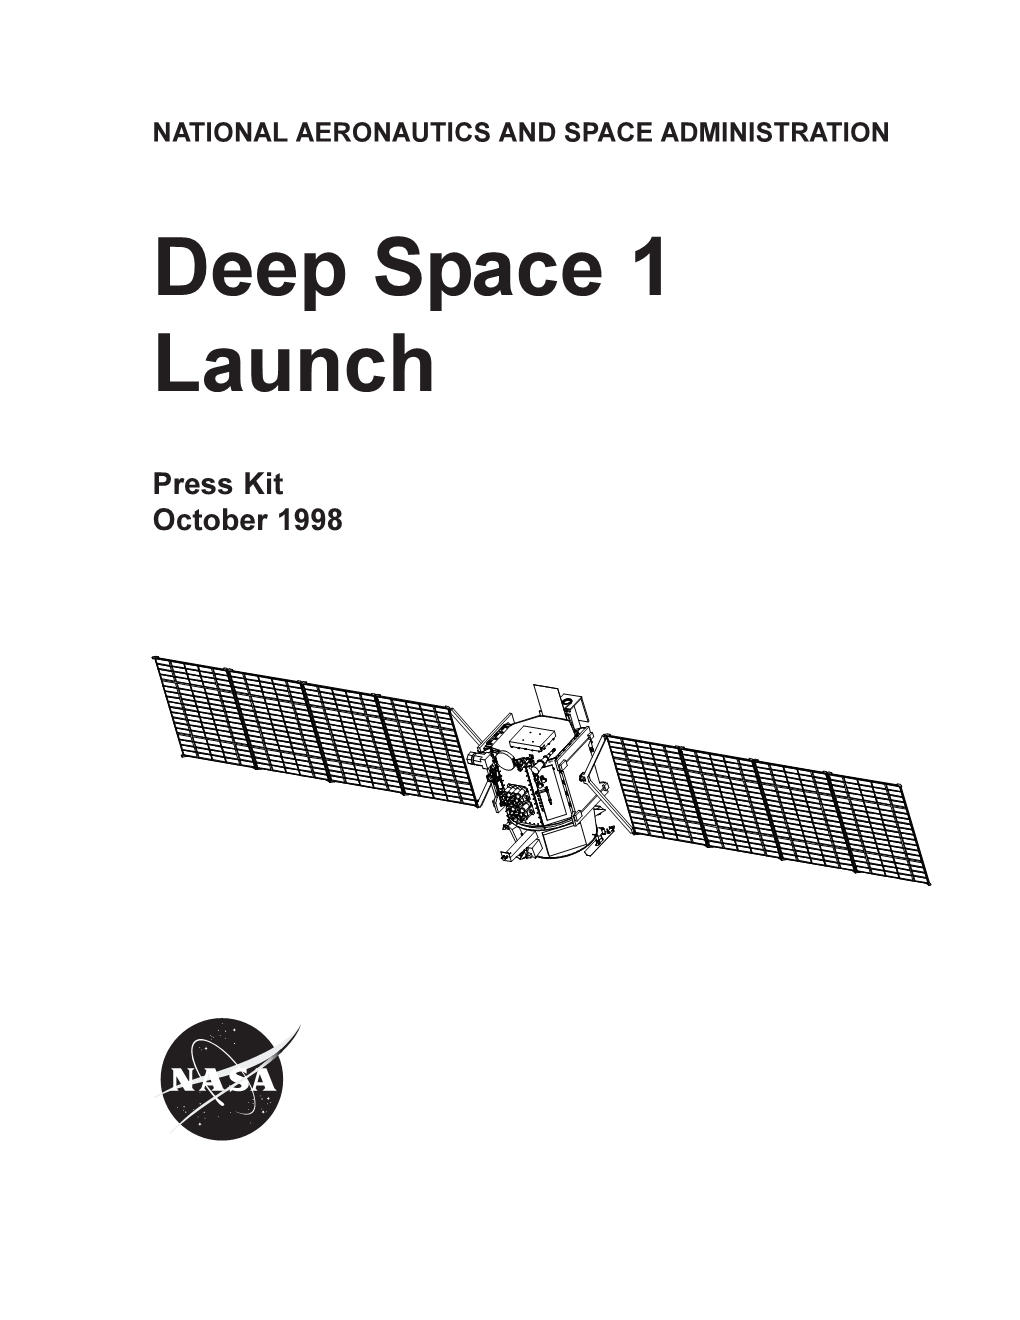 Deep Space 1 Launch